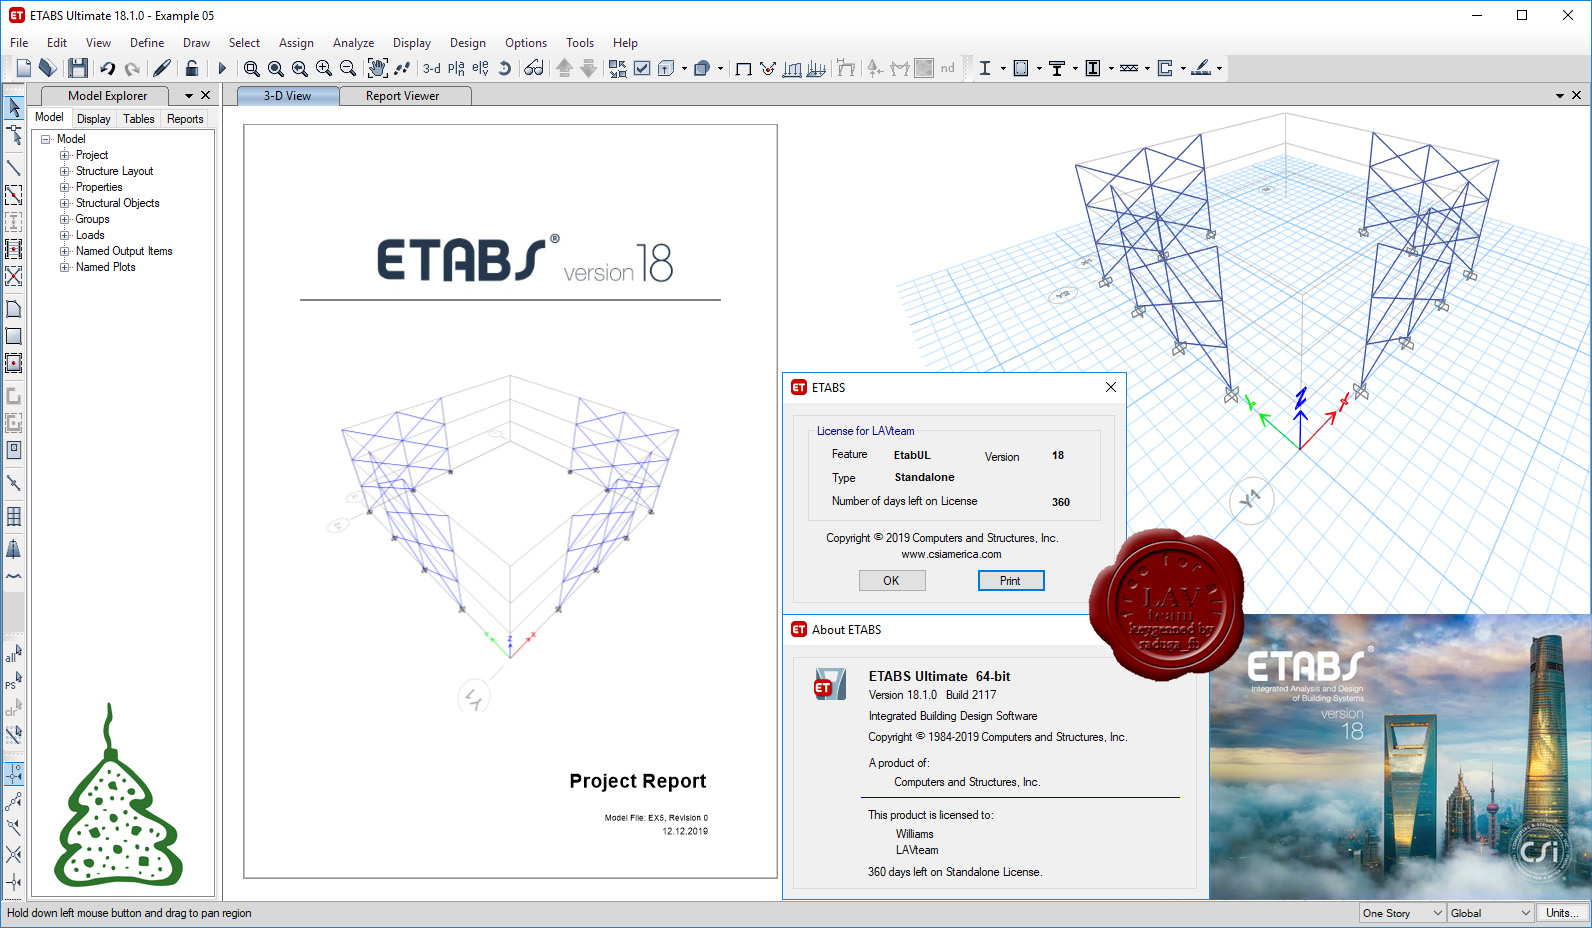 archicad for mac torrent